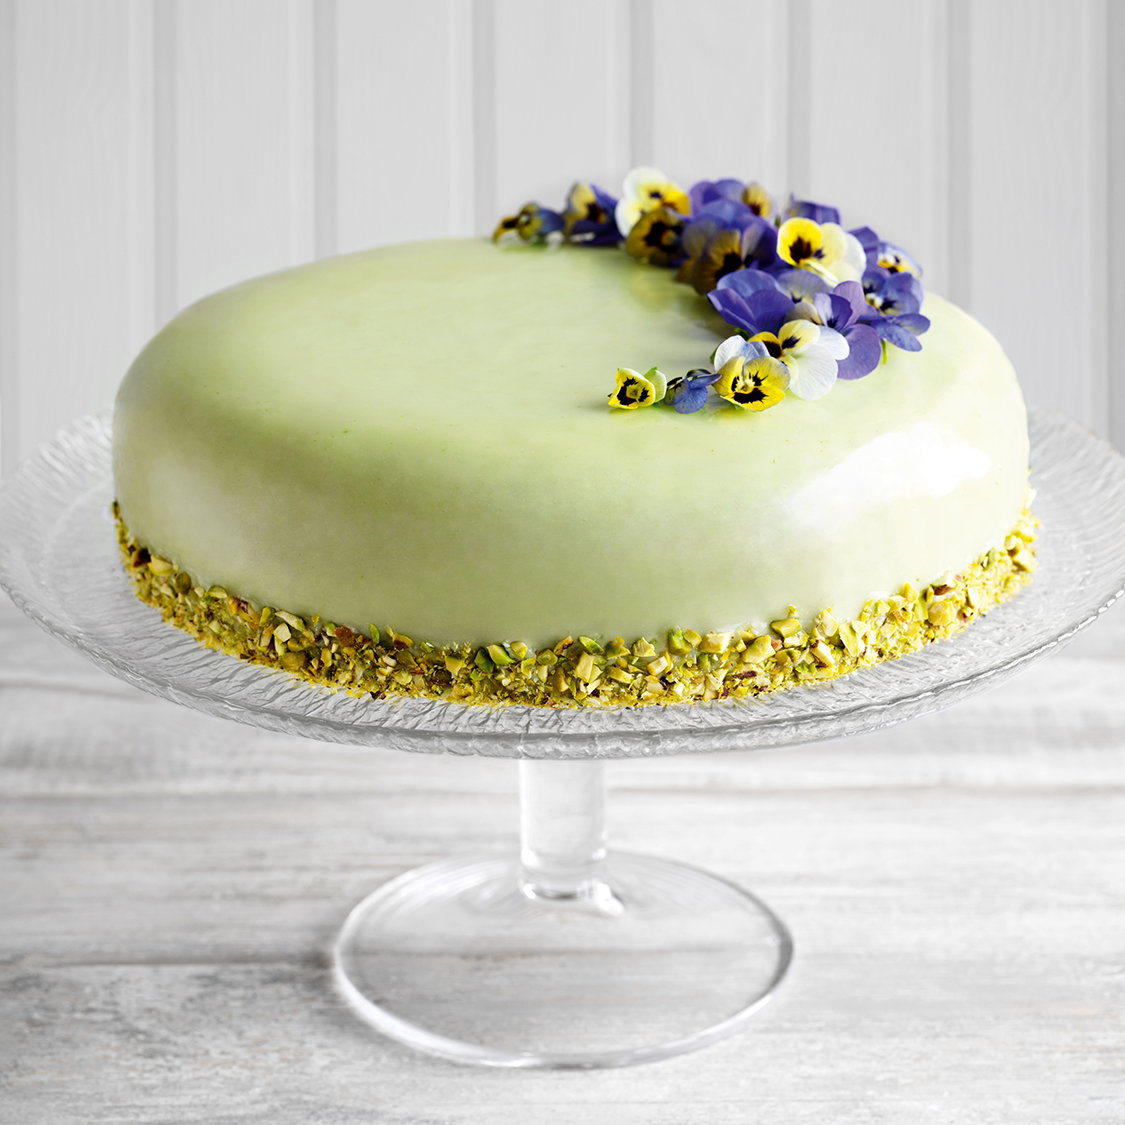 Prue Leith S Le Gateau Vert The Great British Bake Off The Great British Bake Off